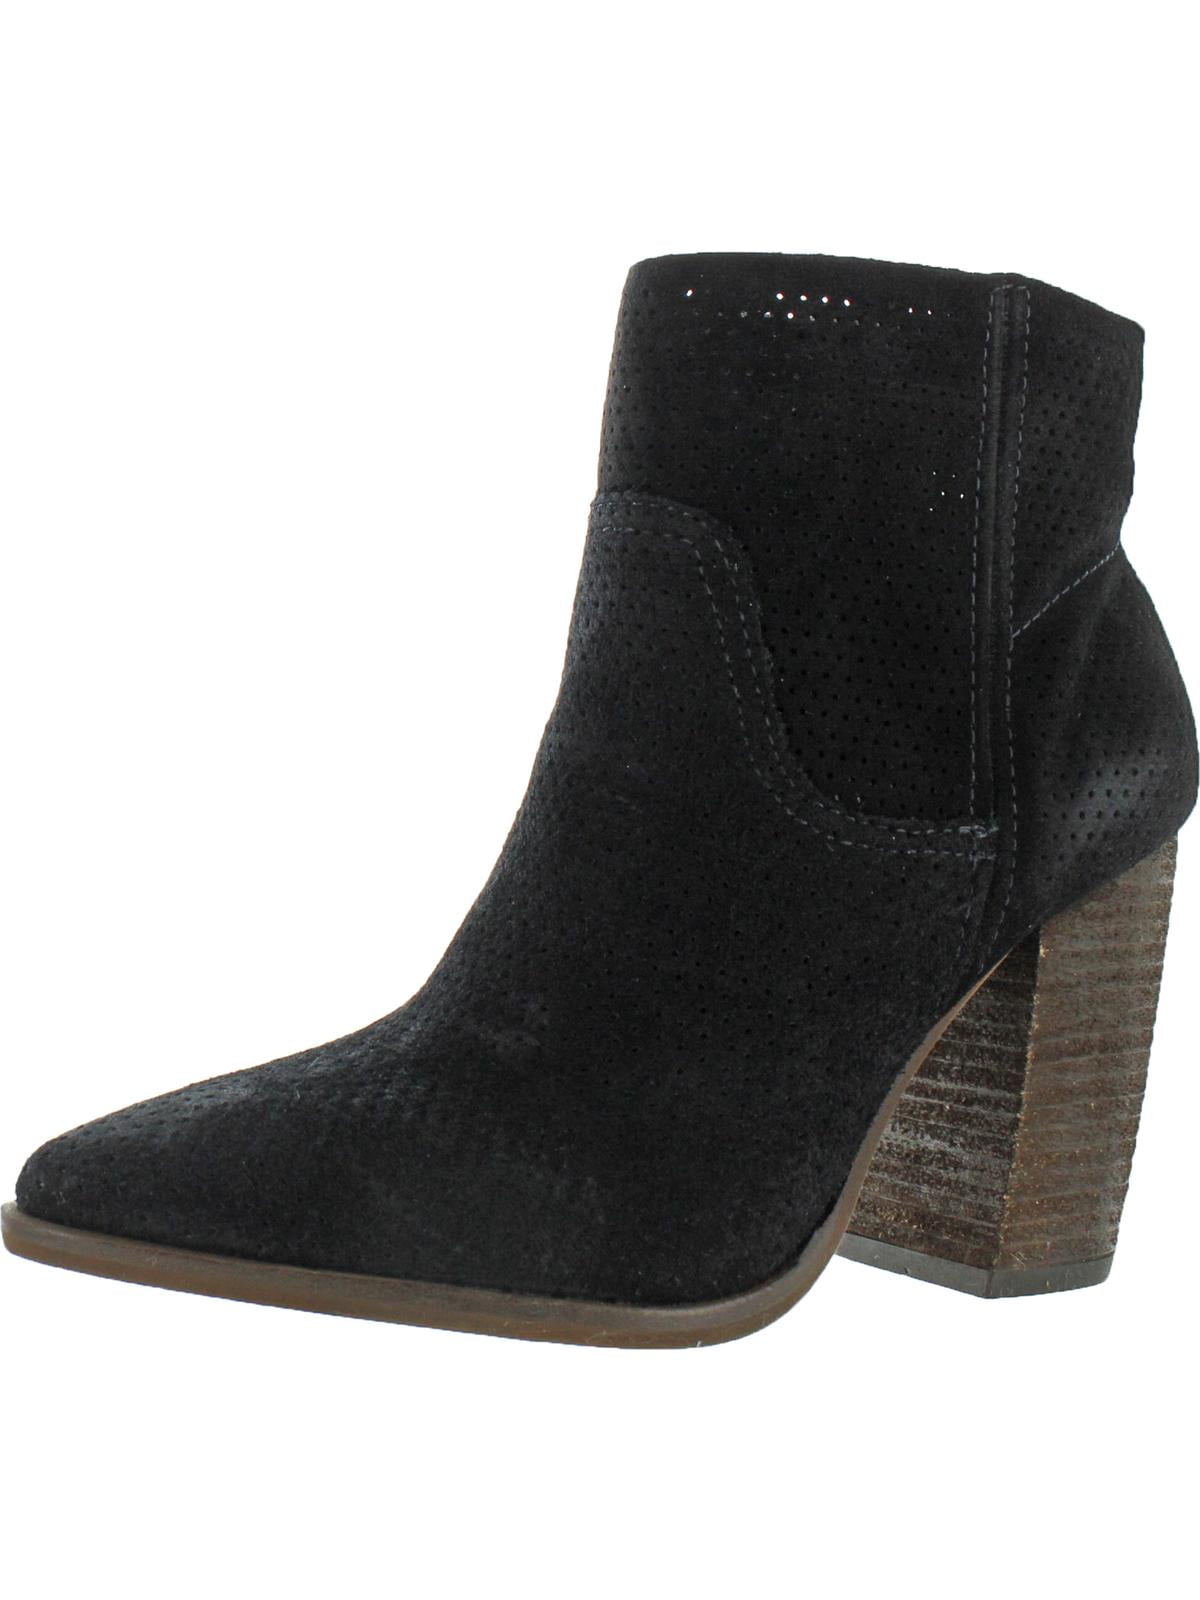 vince camuto black ankle boots